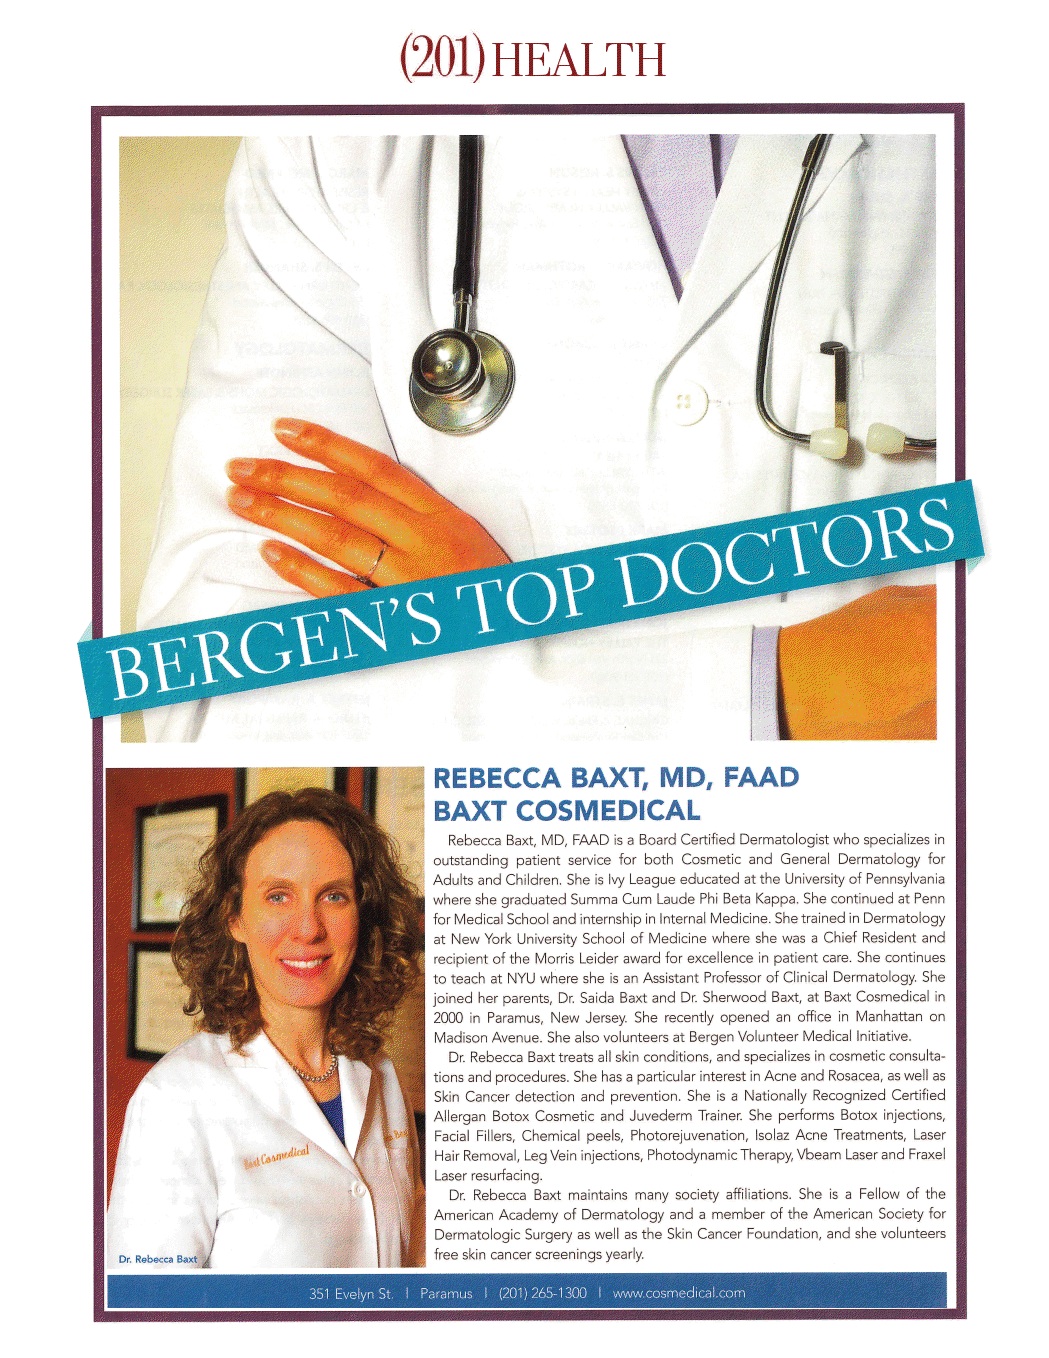 Dr. Rebecca Baxt elected 'Top Docs' for 2 consecutive years!